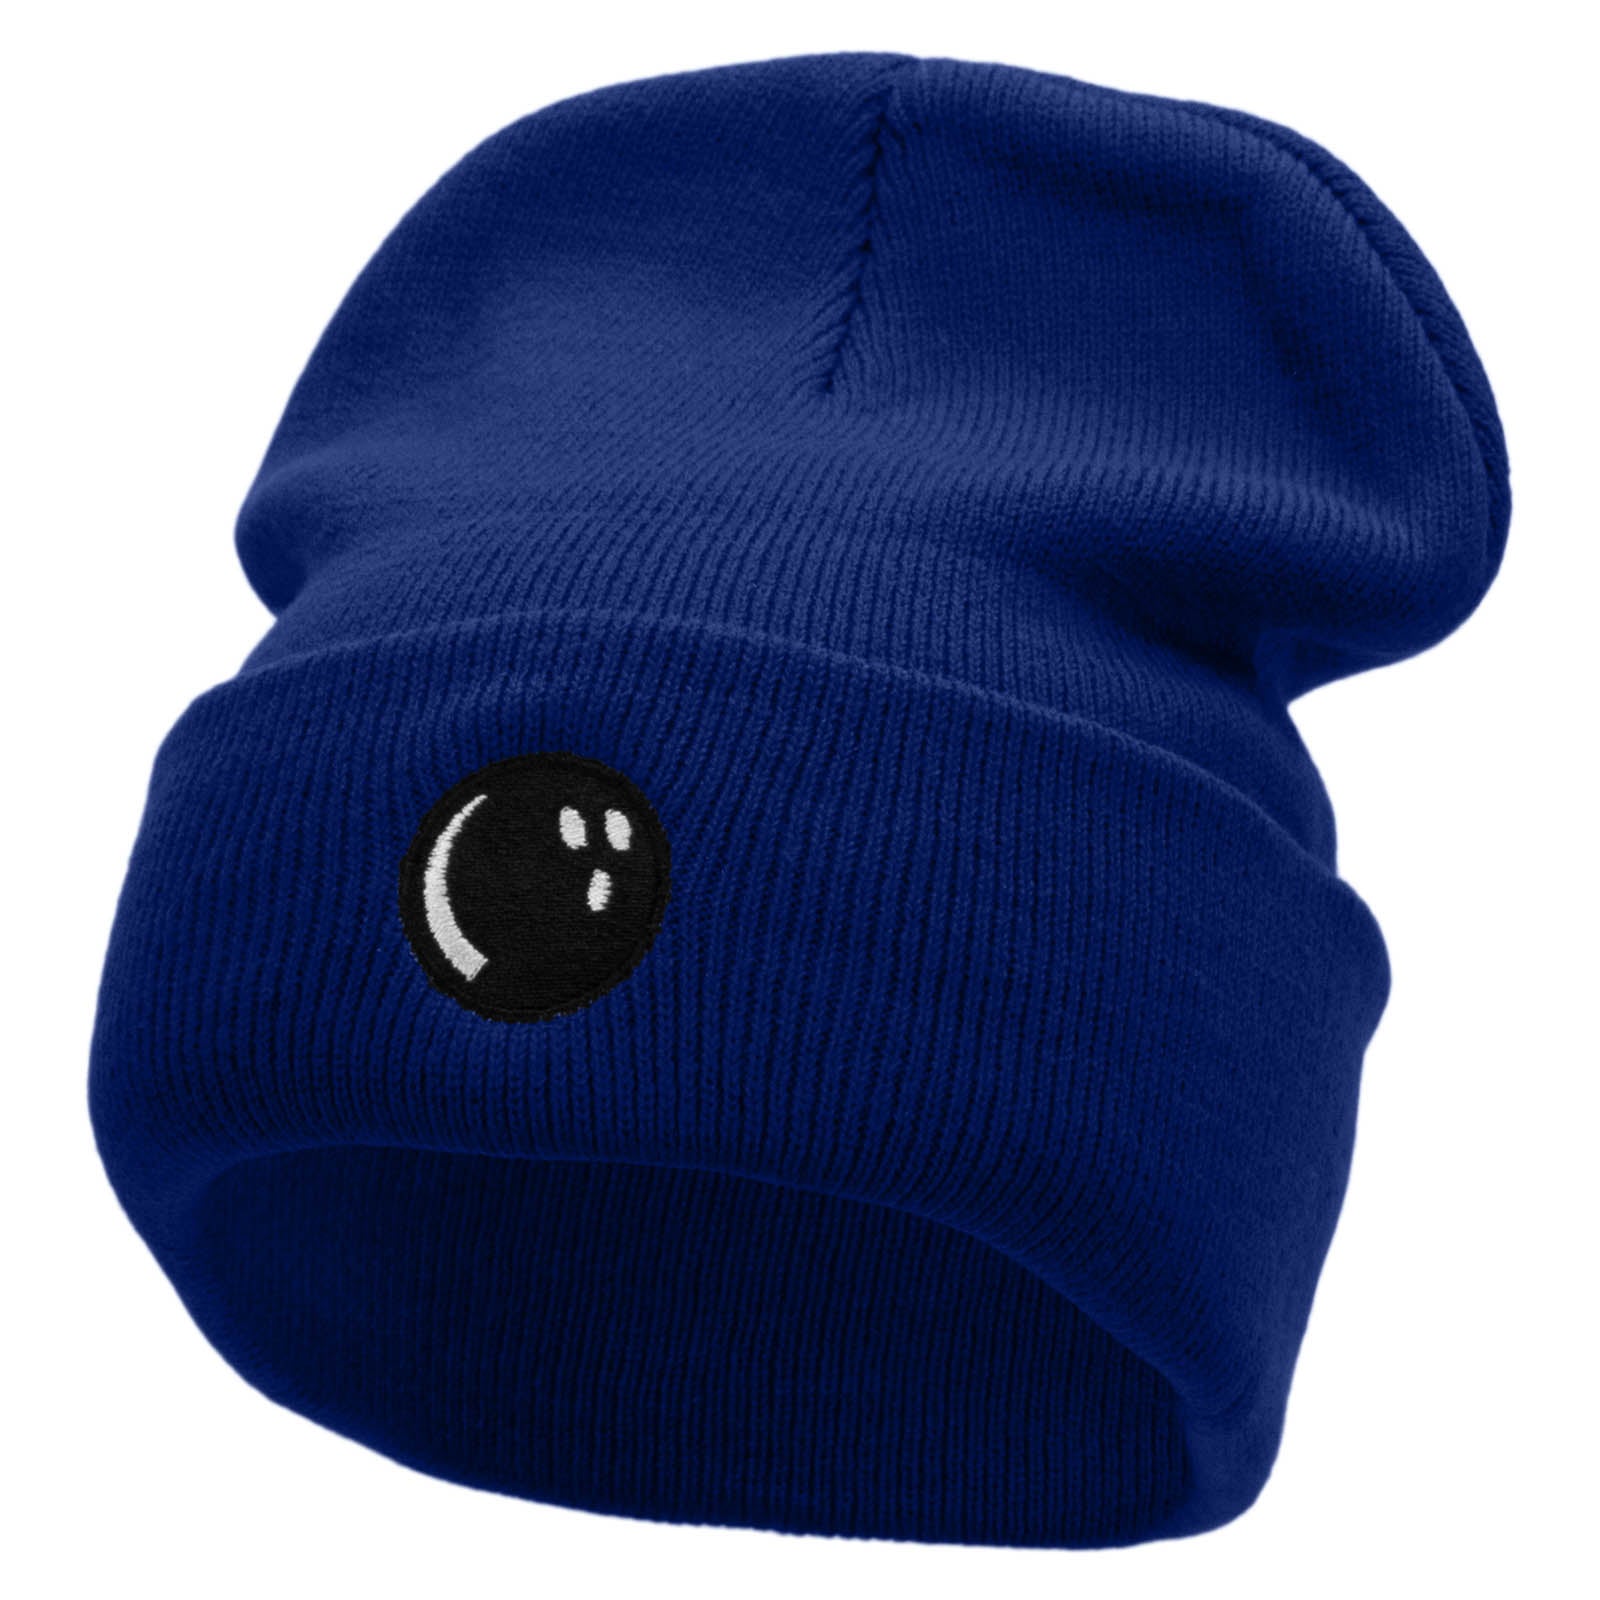 Bowlers Ball Embroidered 12 Inch Long Knitted Beanie - Royal OSFM